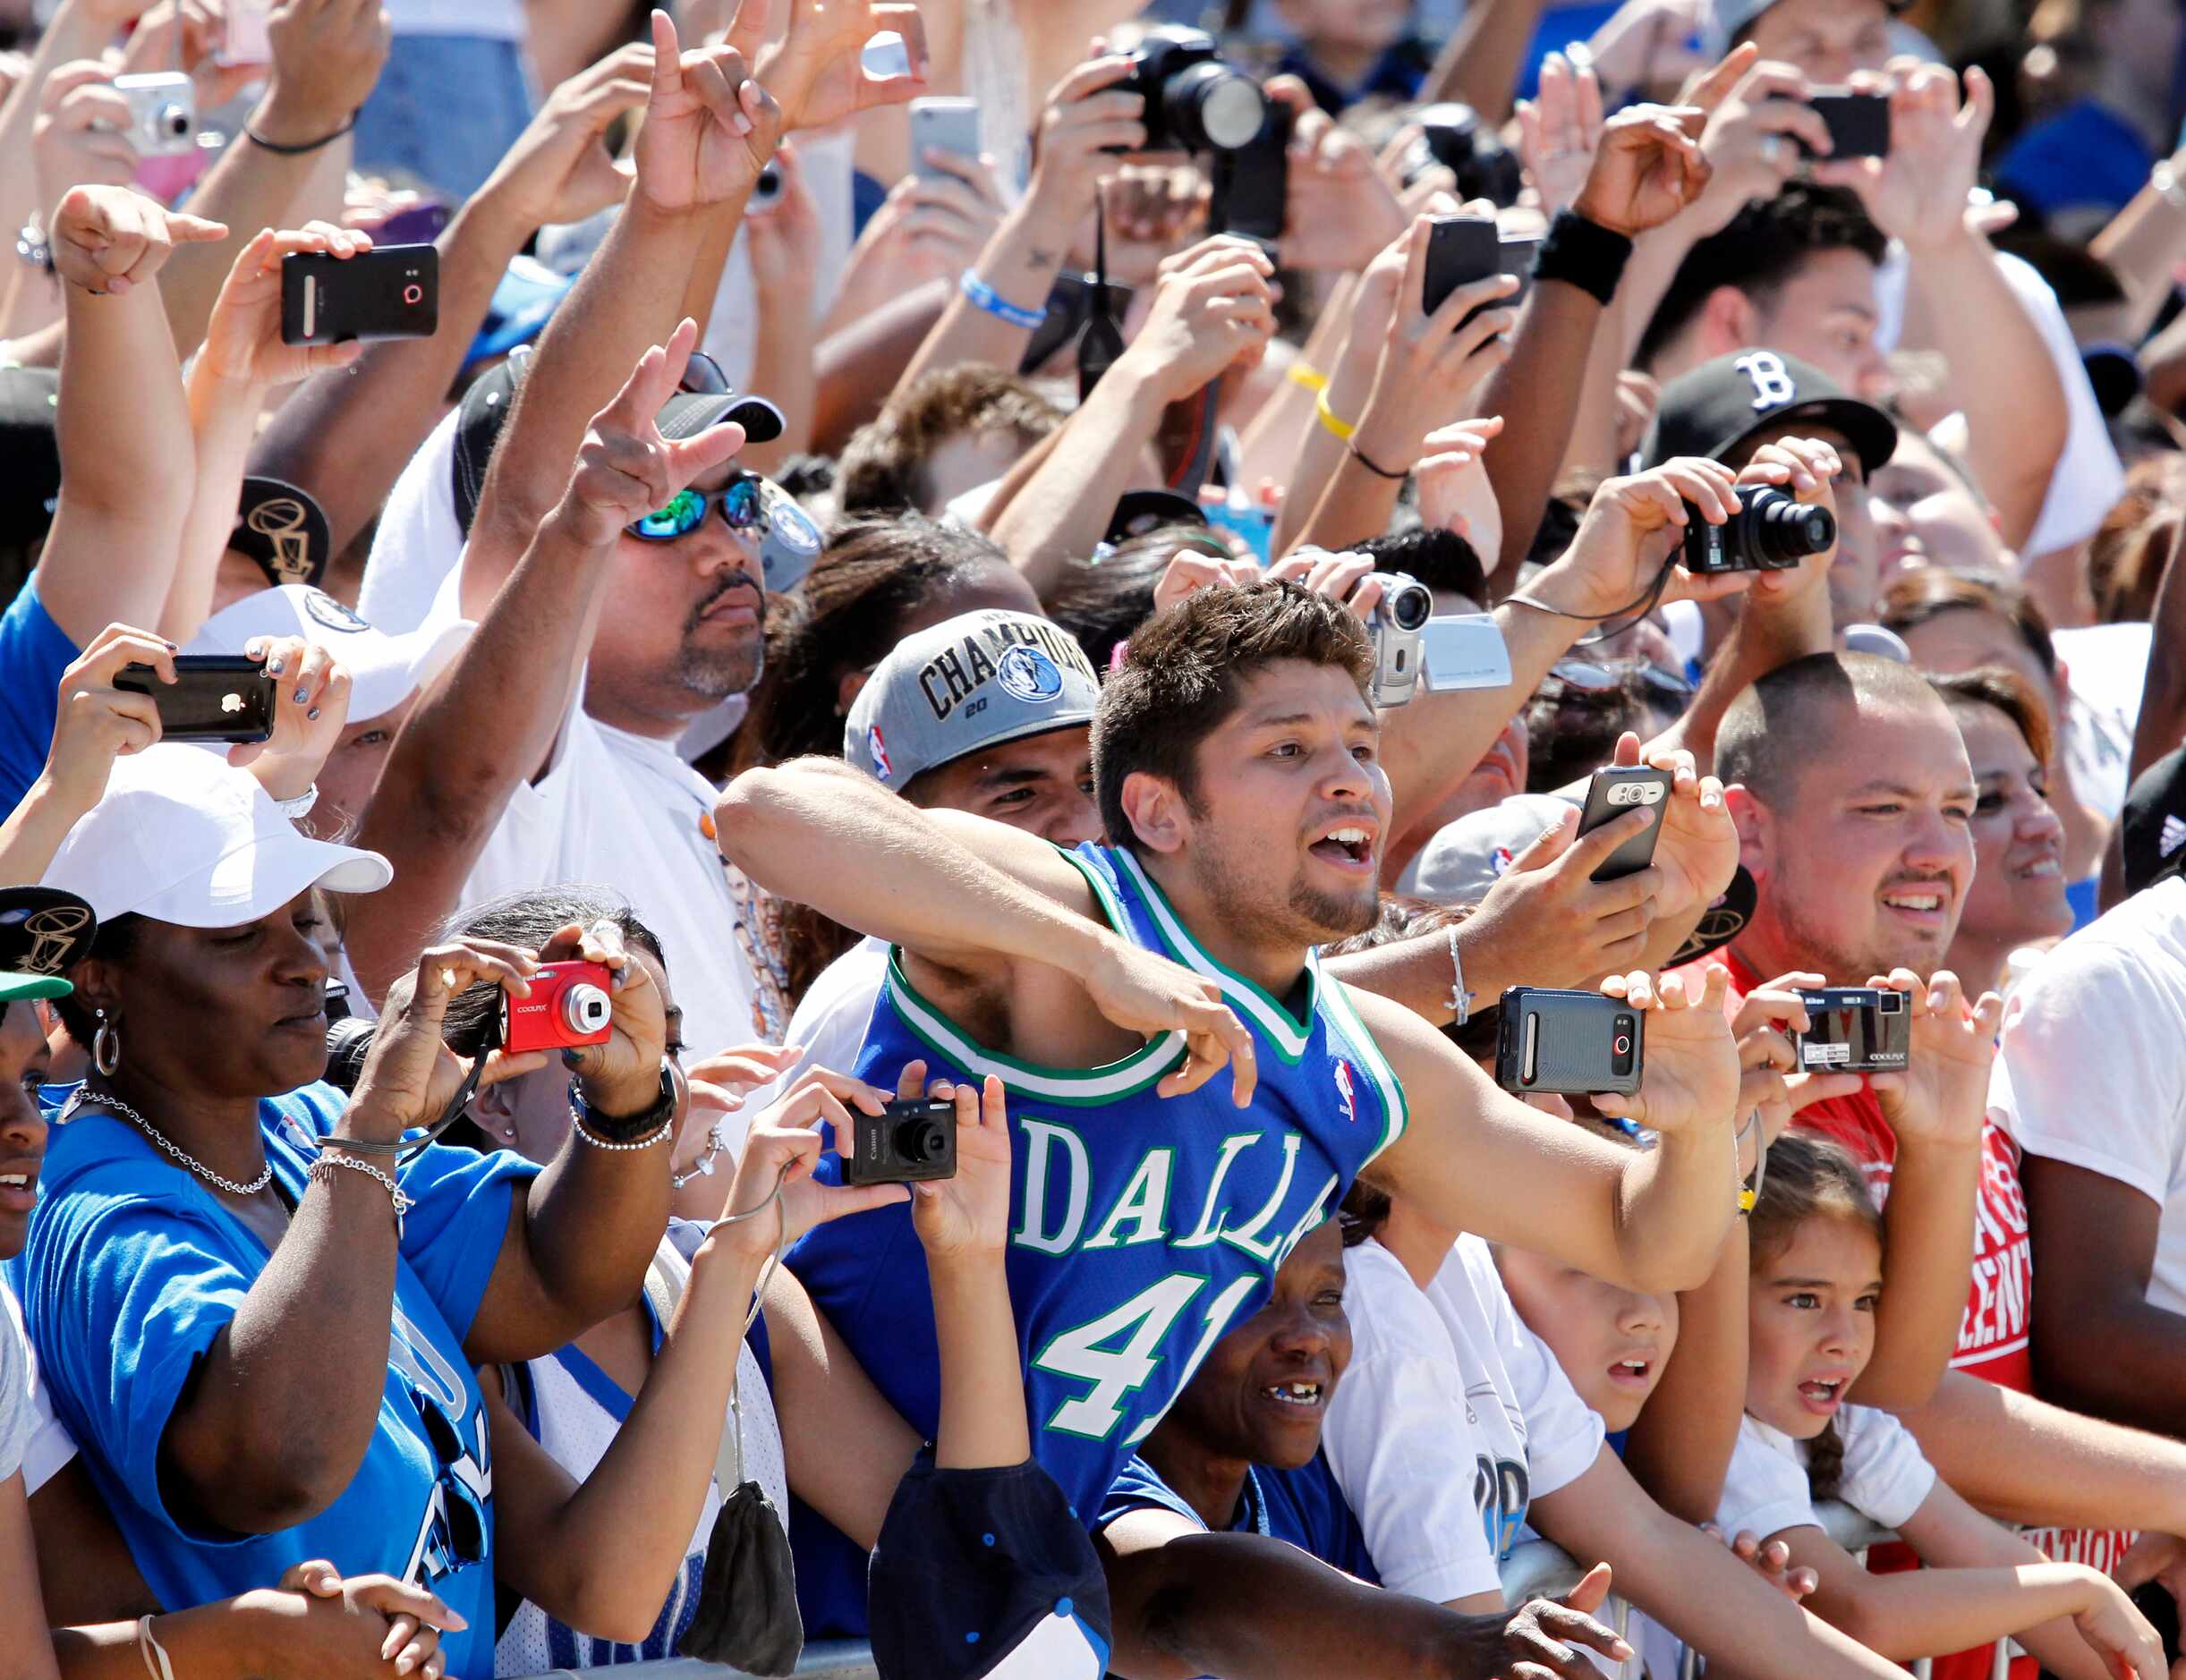 Fans clamor for photos along the parade route near the American Airlines Center during the...